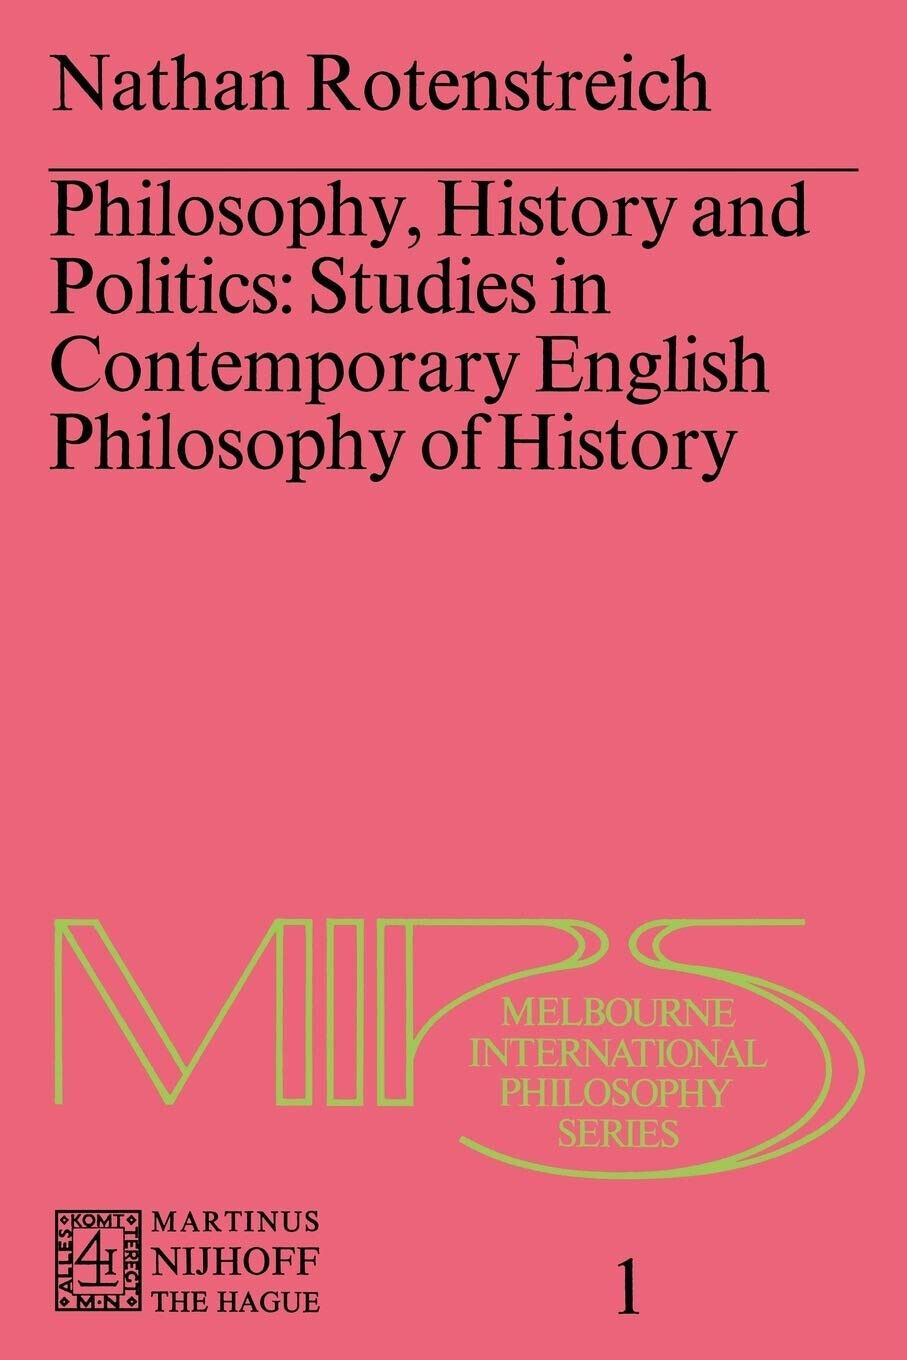 Philosophy, History and Politics - Nathan Rotenstreich - Springer, 1976 libro usato